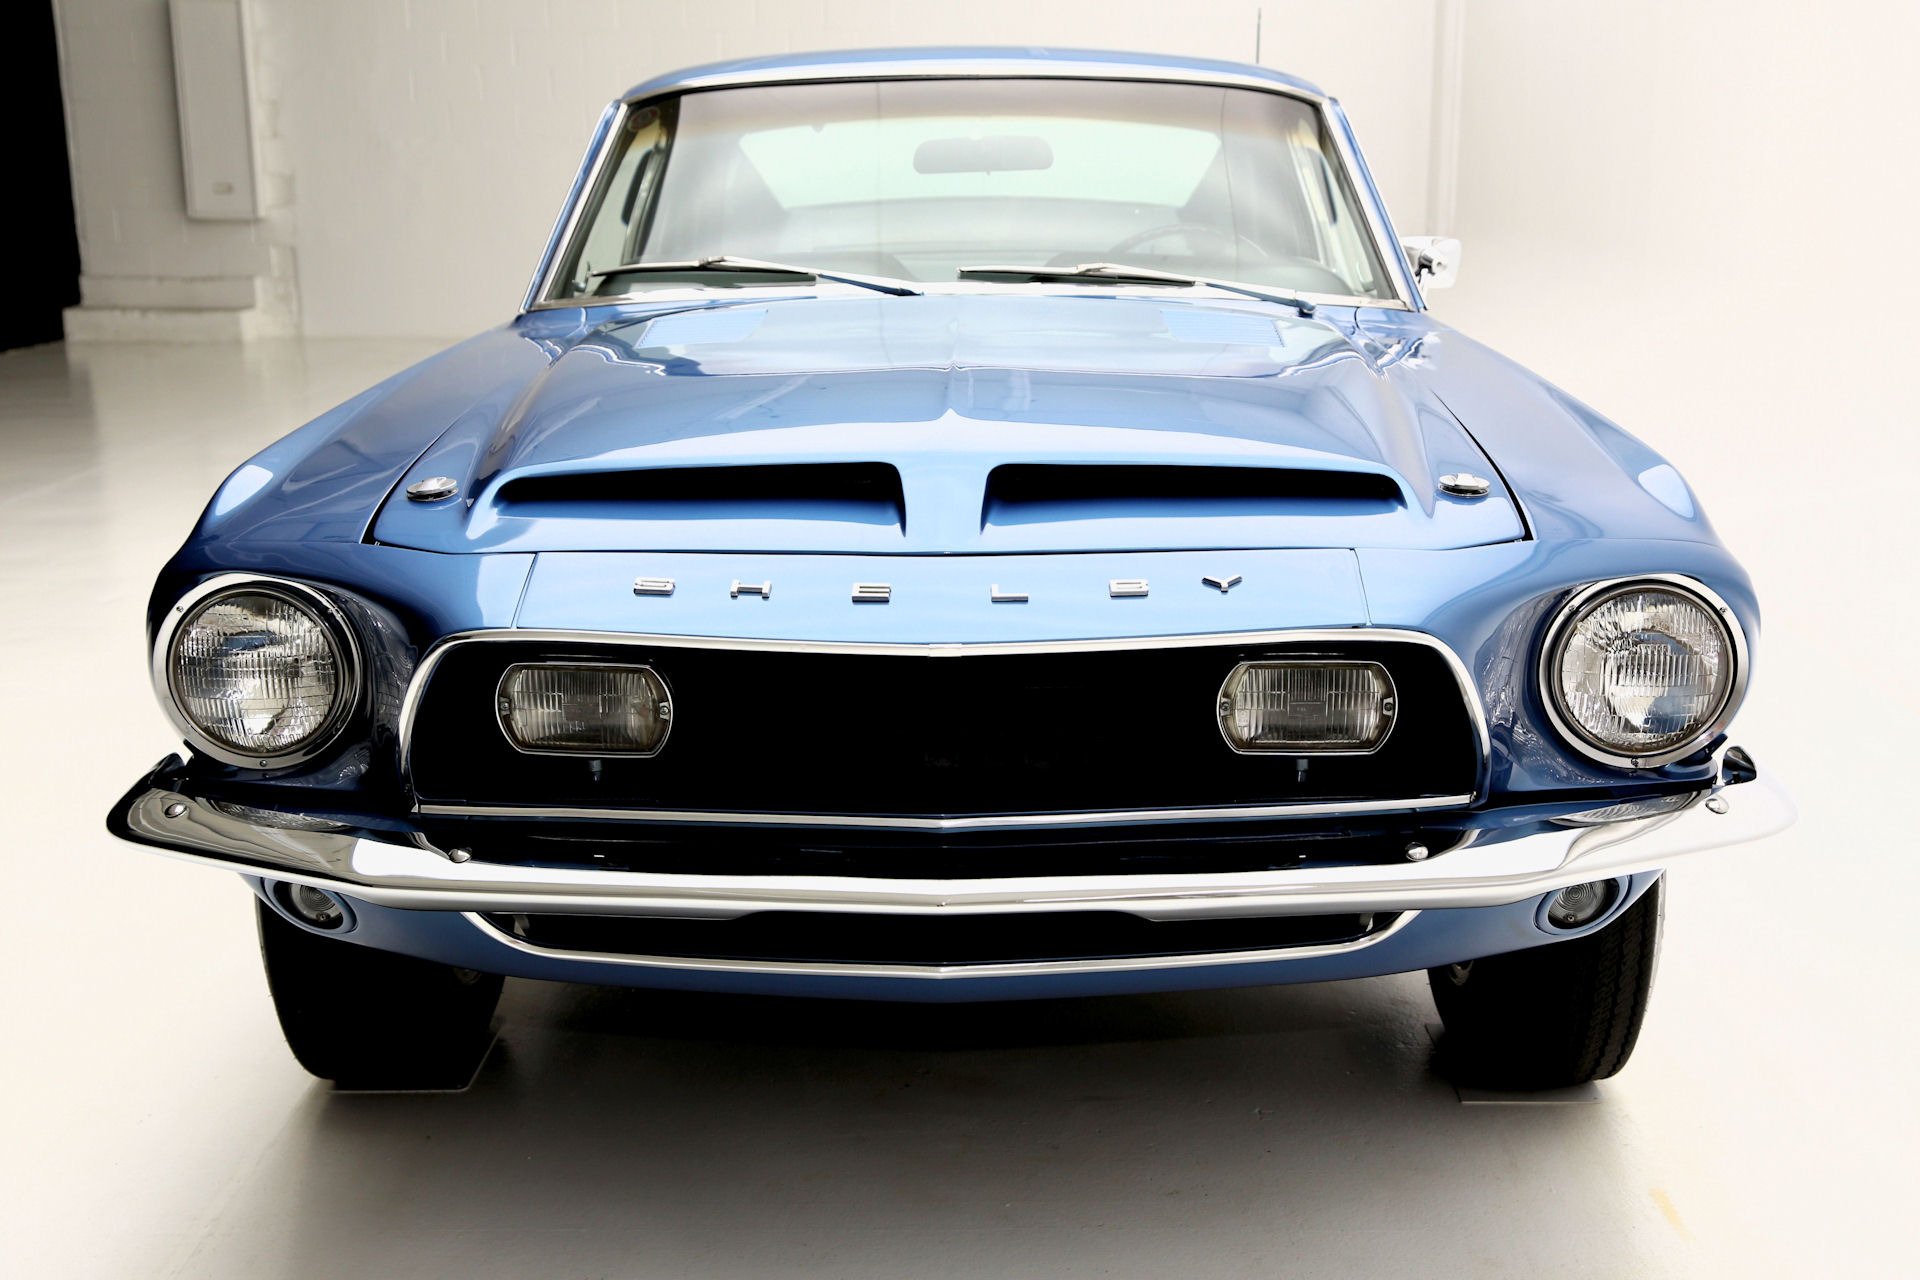 1968, Shelby, Cobra, Gt350, Fastback, Muscle, Classic, Ford, Mustang Wallpaper